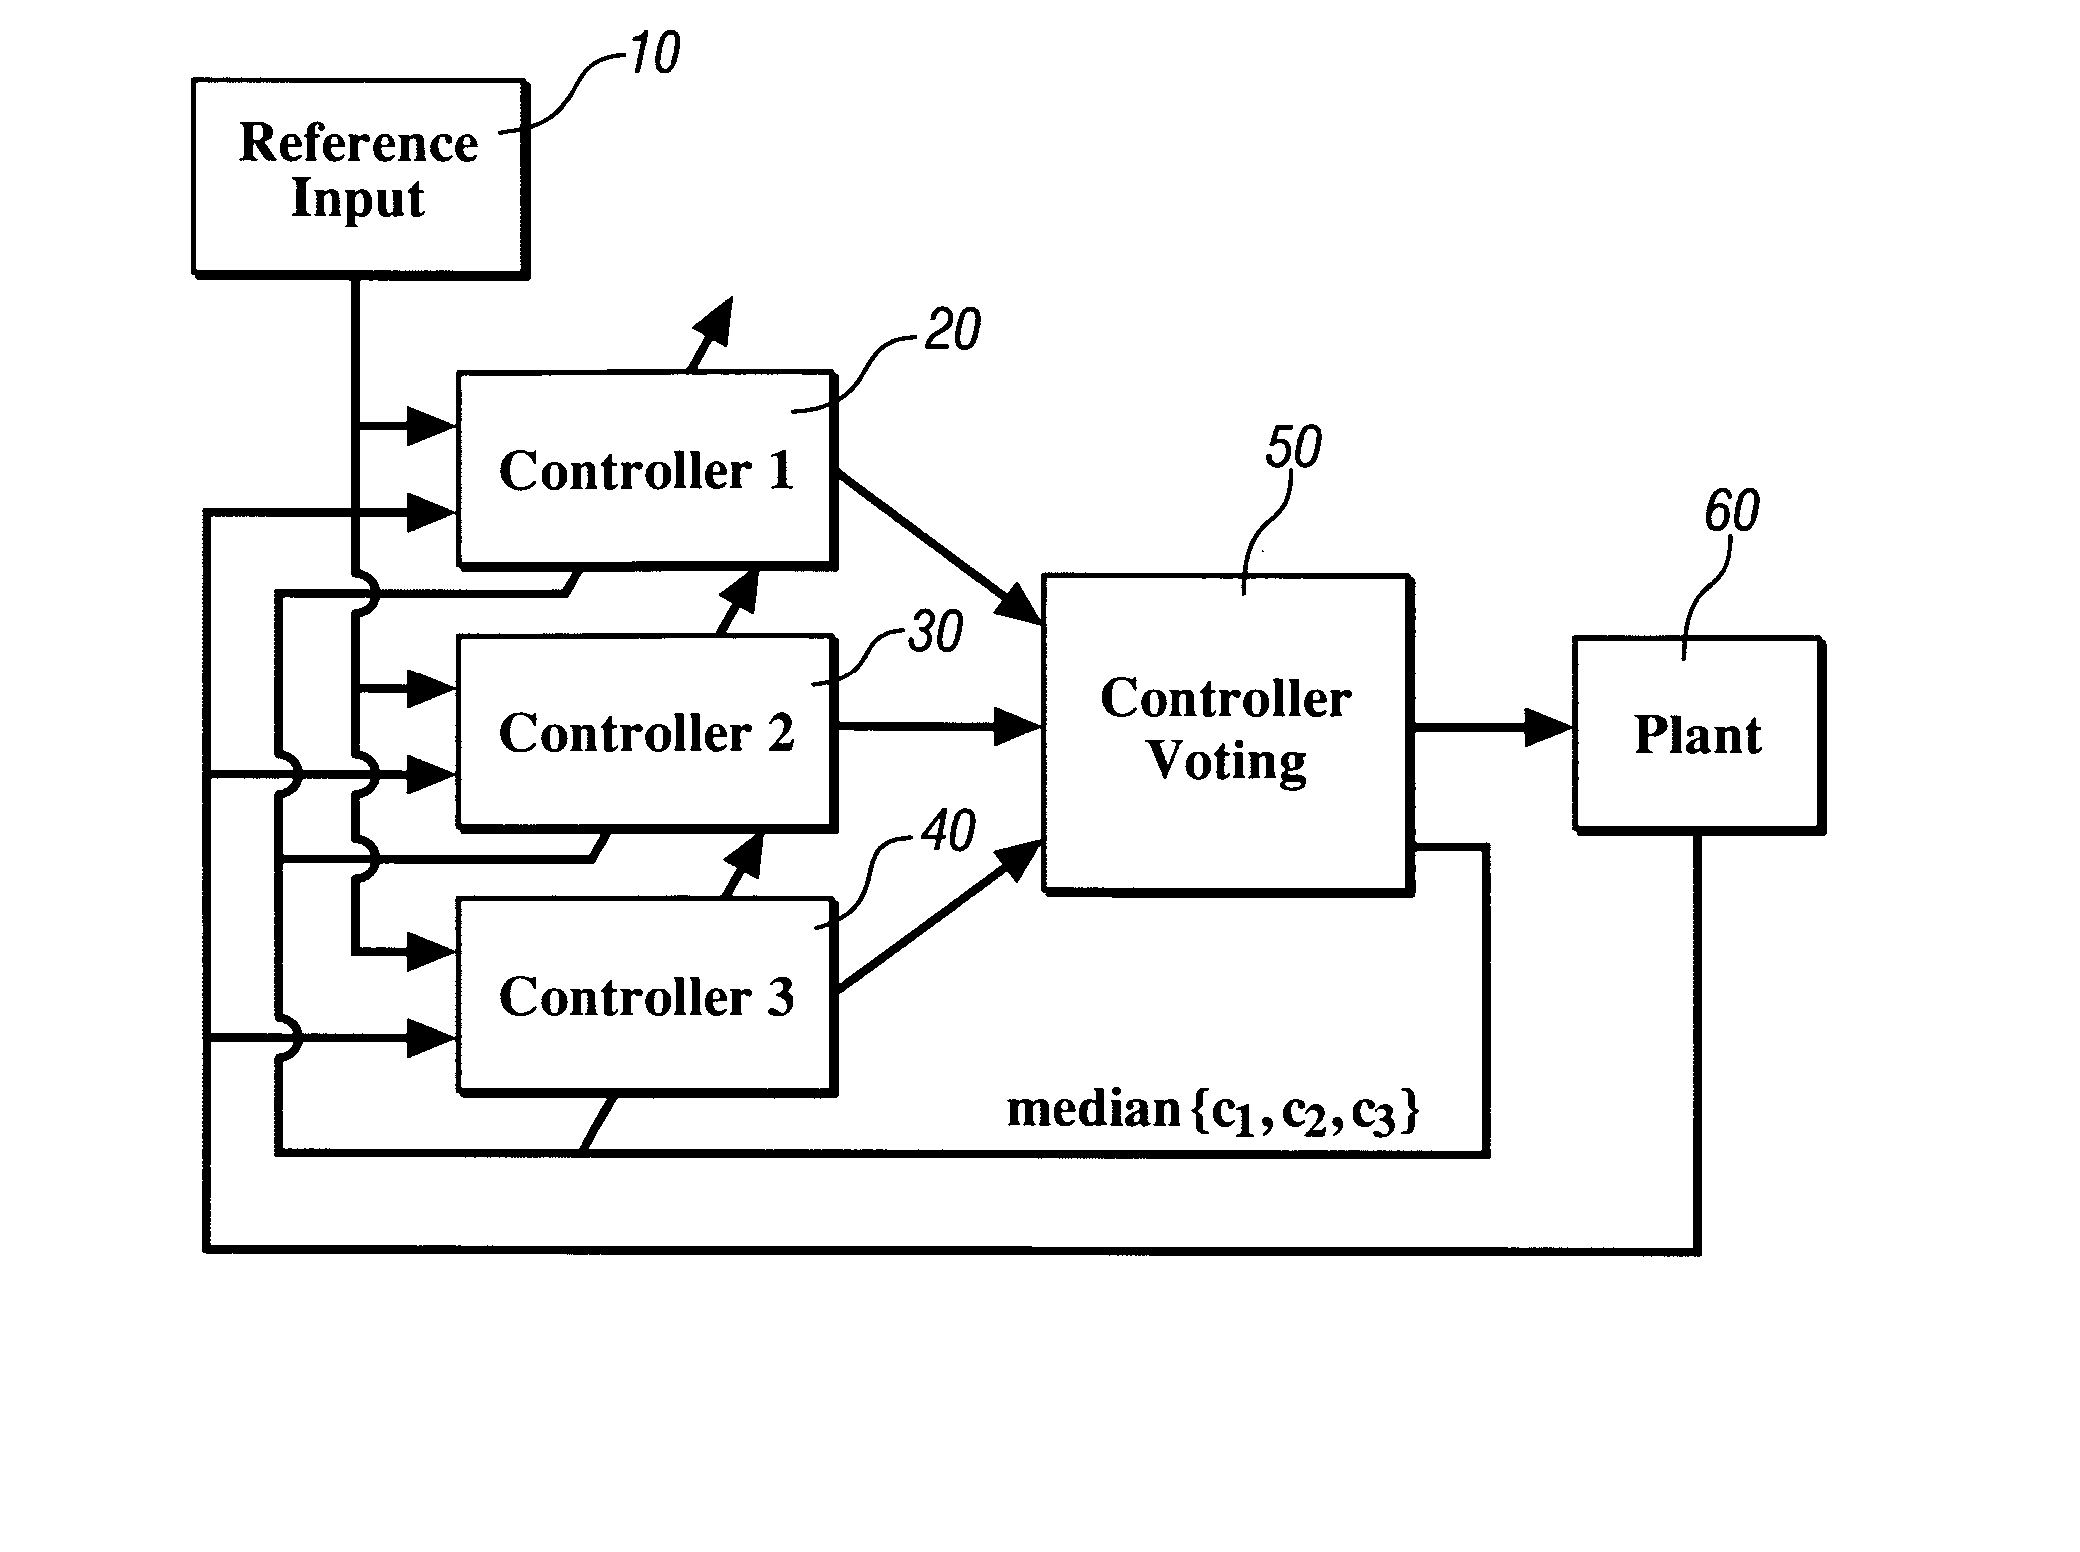 Method for synchronization of a controller